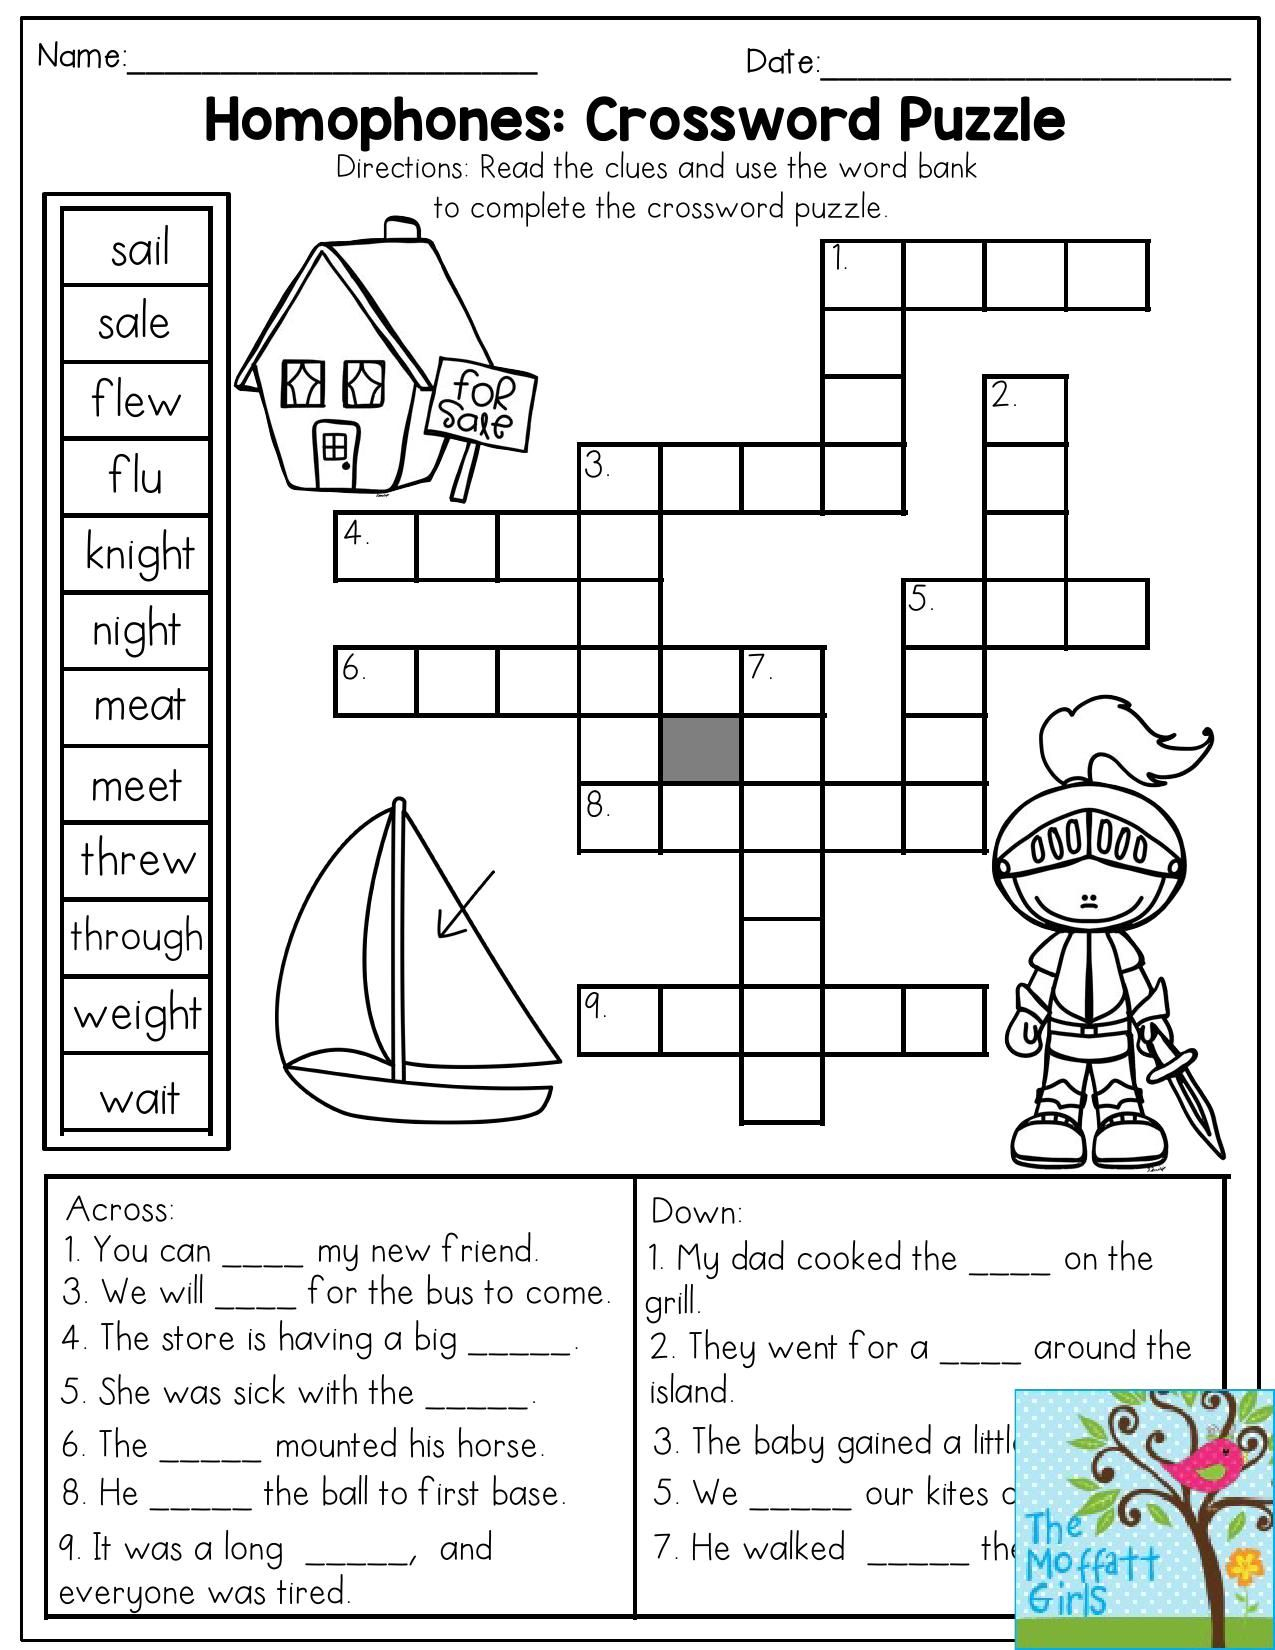 Homophones: Crossword Puzzle- Read The Clues And Use The Word Bank - Printable Crossword Puzzles For Grade 1